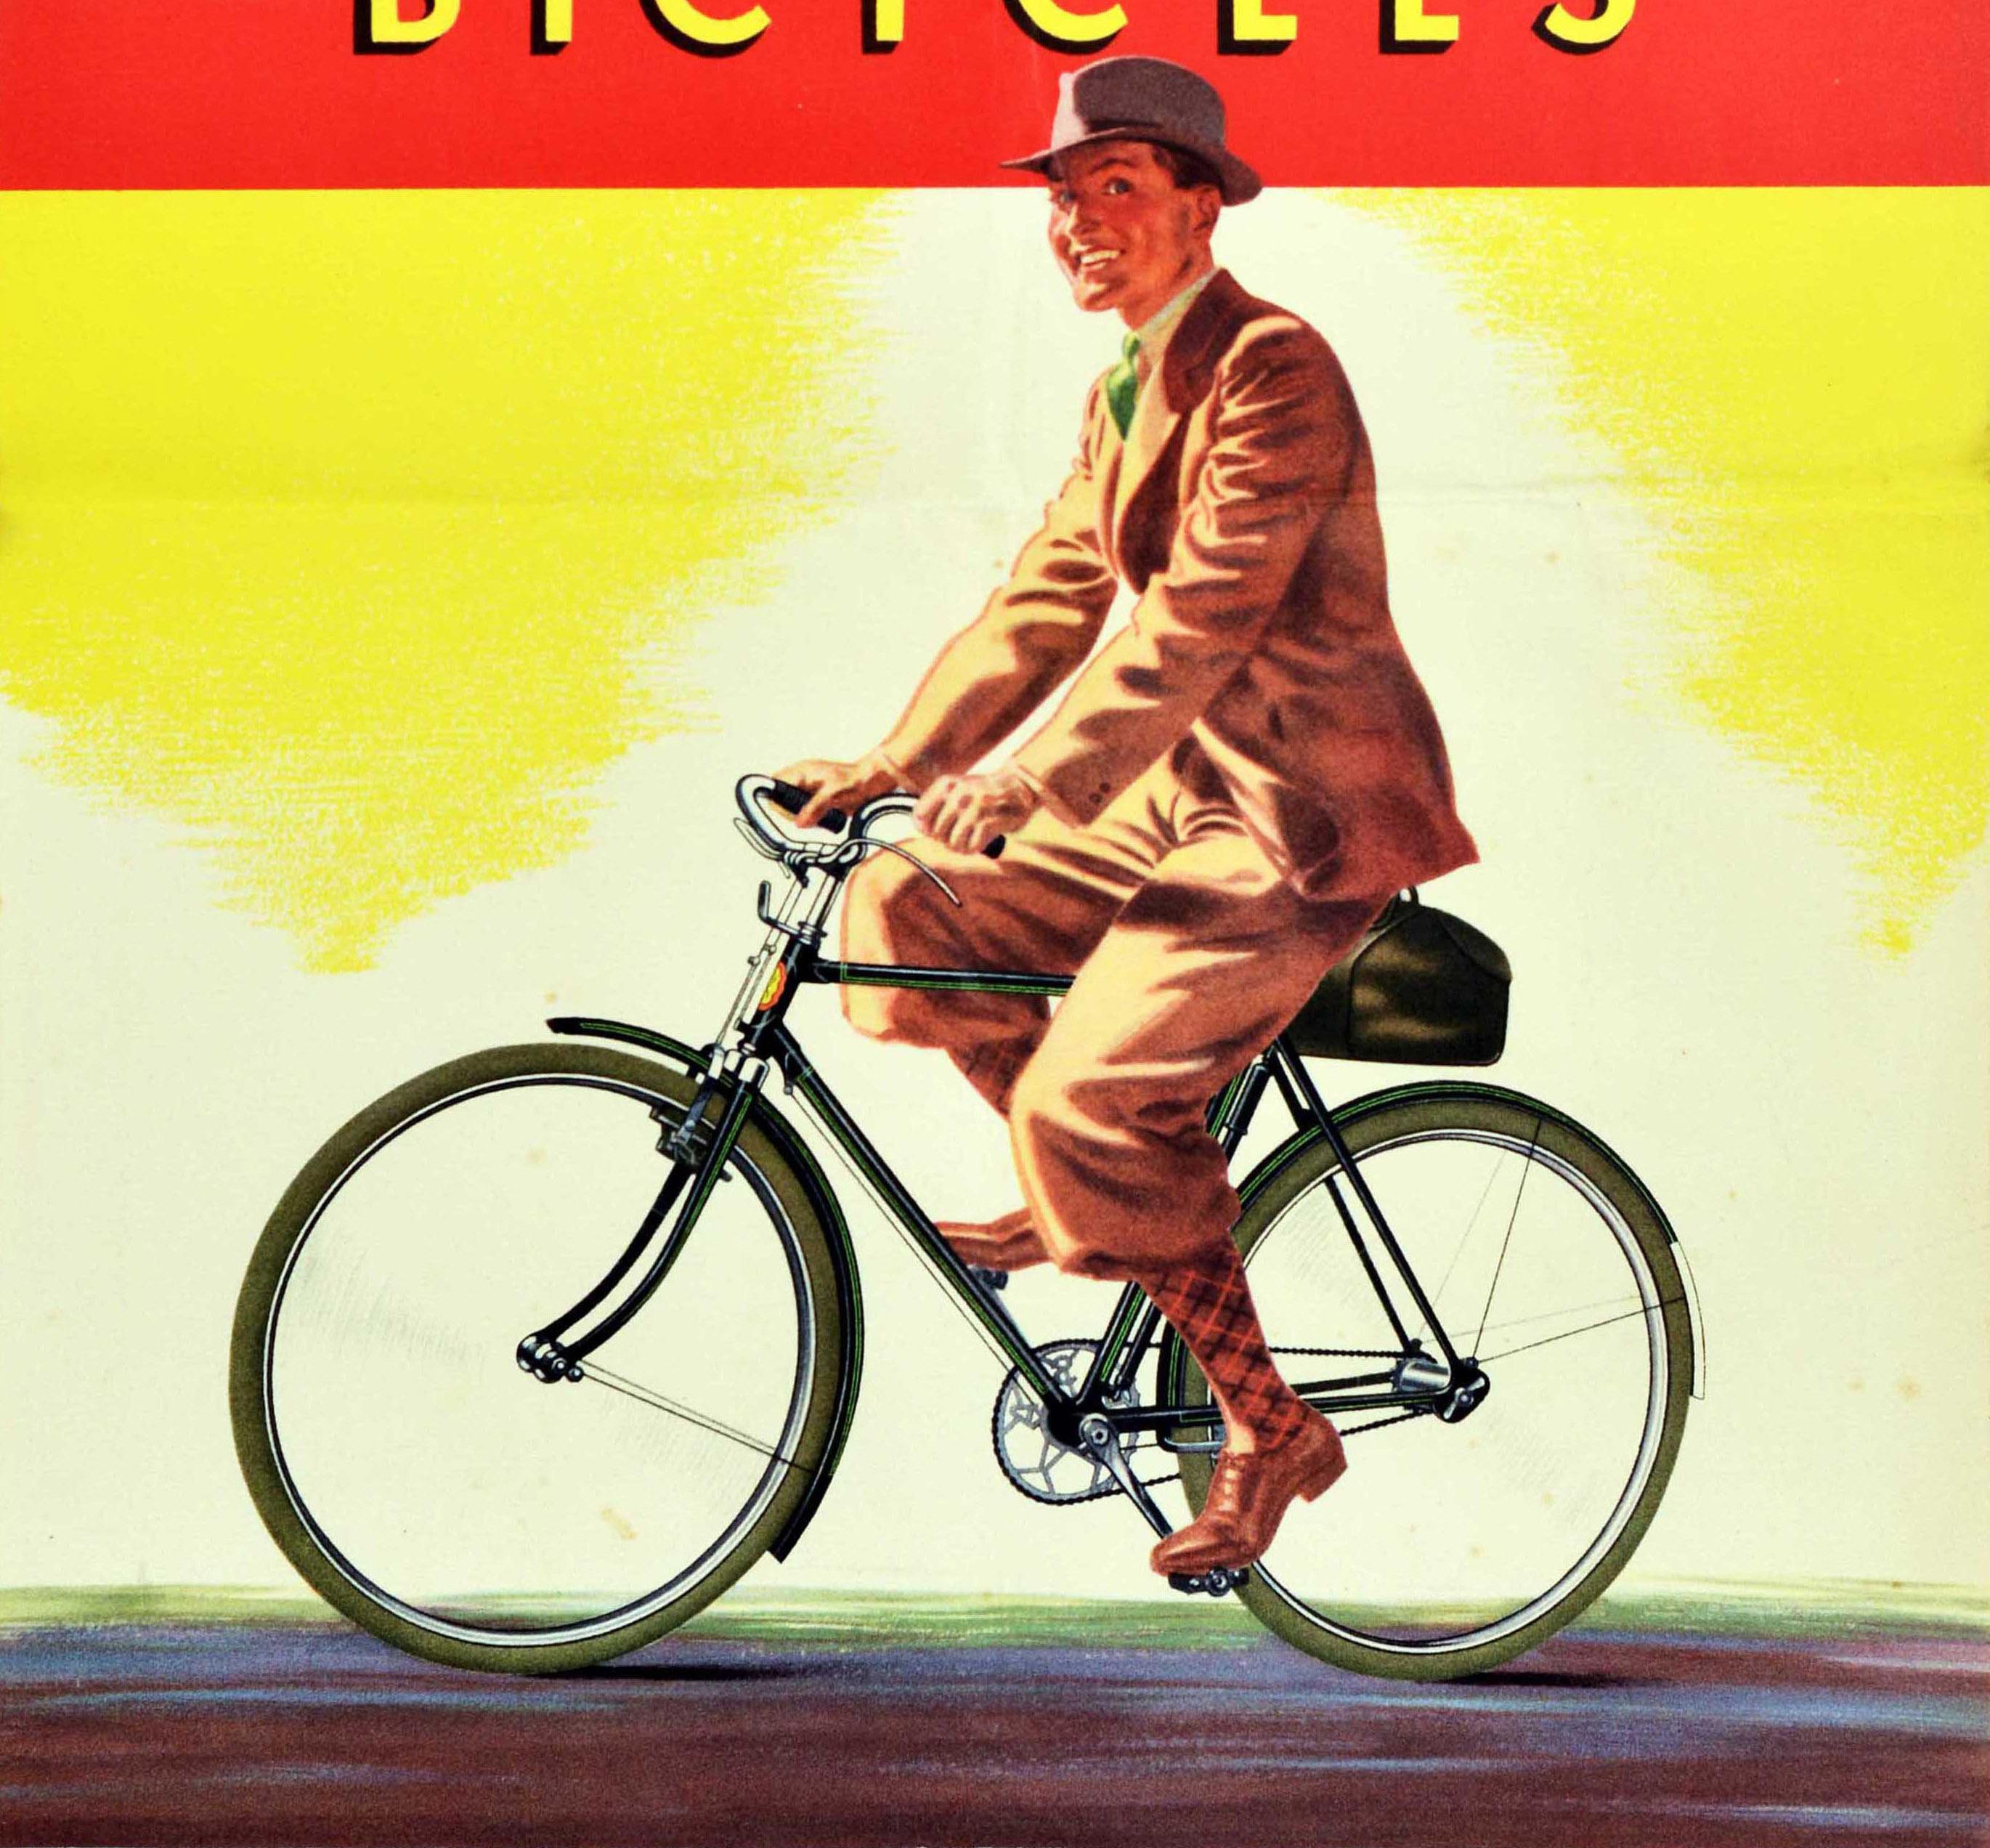 Original Vintage Advertising Poster BSA Steamlight Bicycles Cycling Design Art In Good Condition For Sale In London, GB